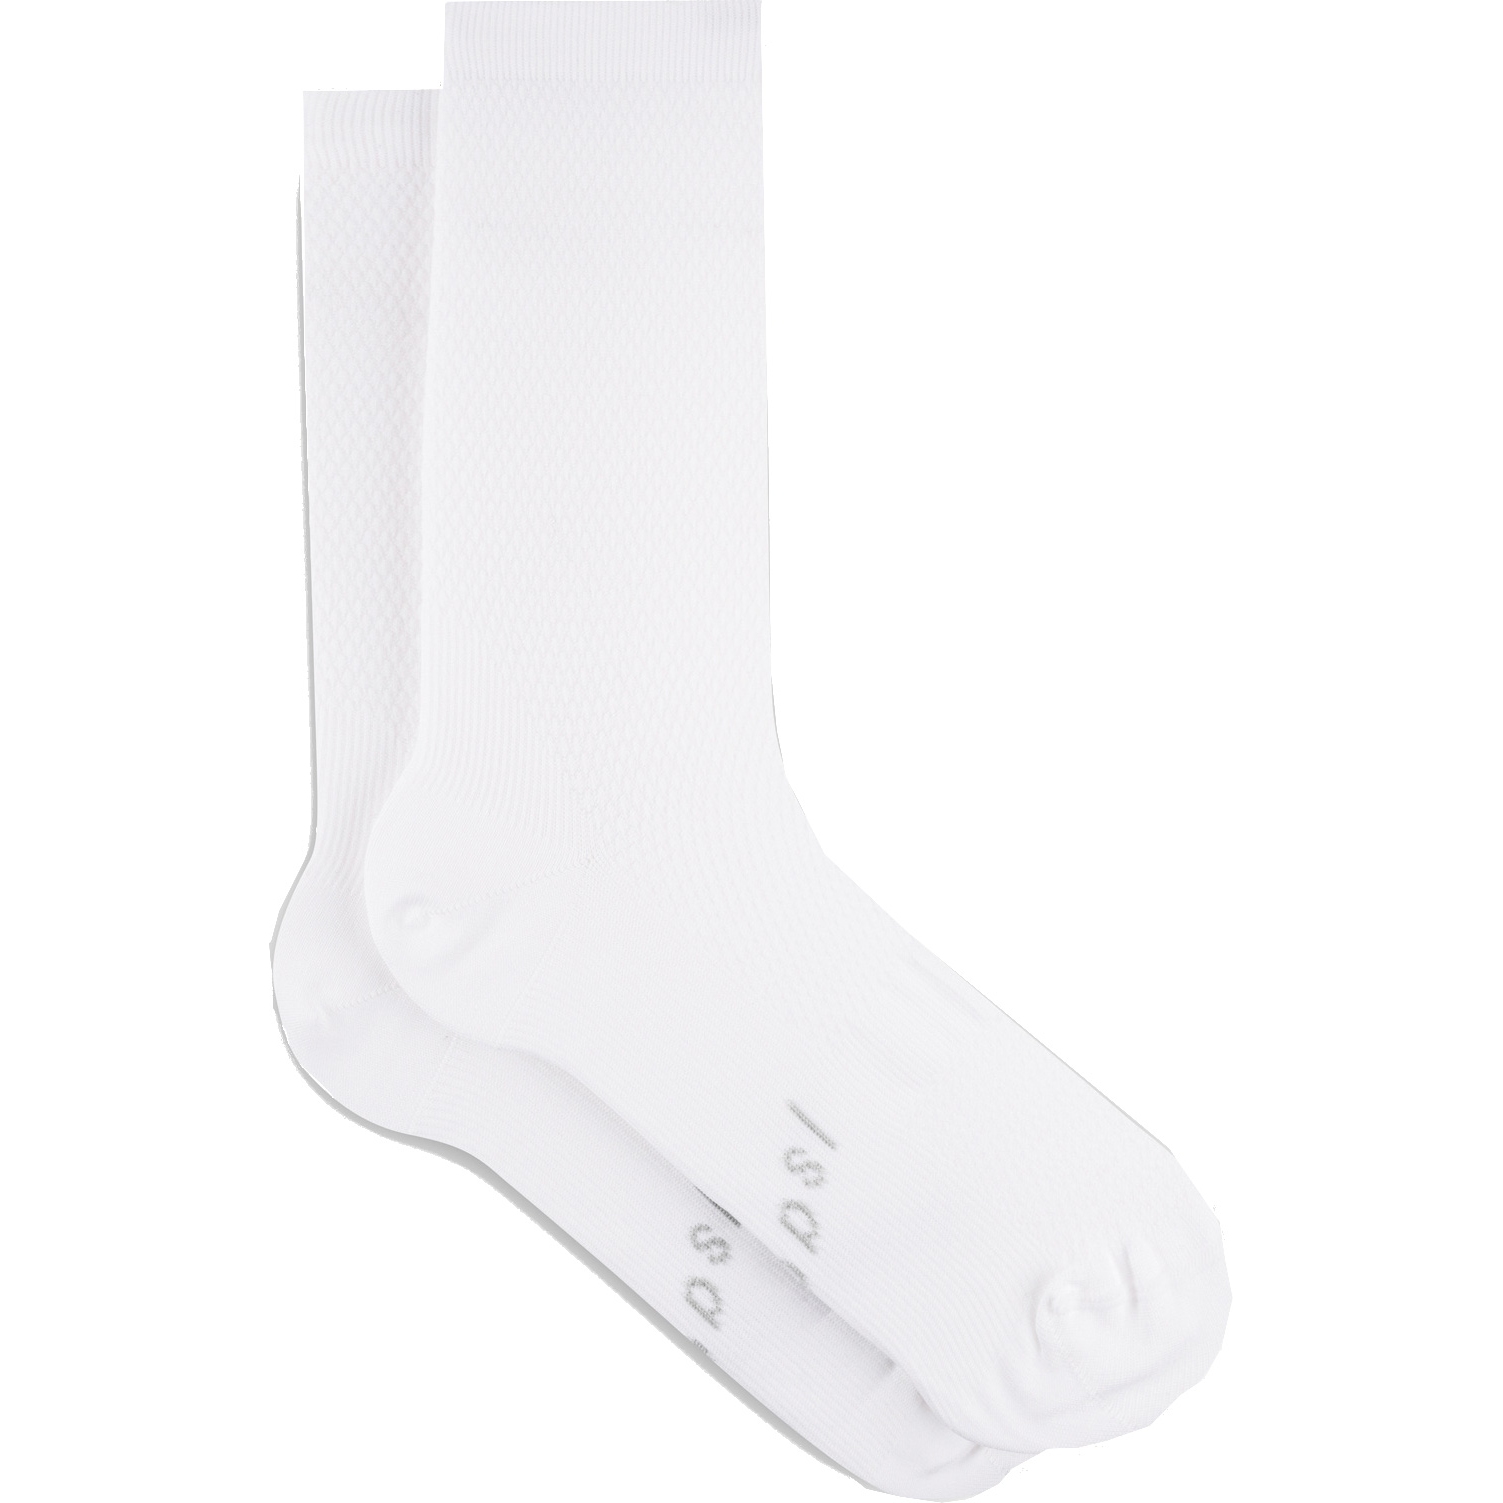 Picture of Isadore Echelon Cycling Socks 2.0 - White